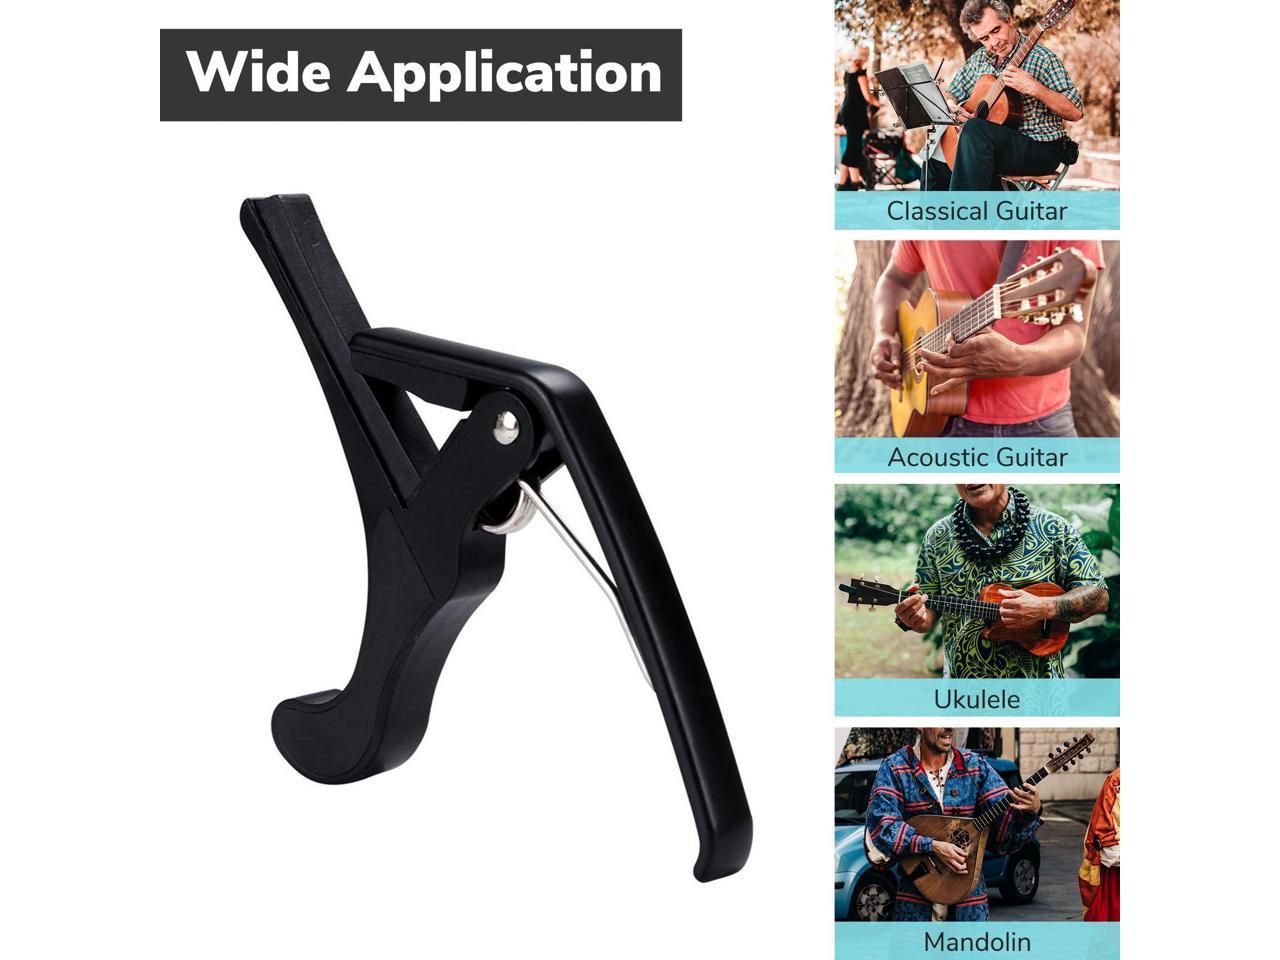 Black Fast Change Clamp Key Trigger Capo For Acoustic Electric Classical Guitar 